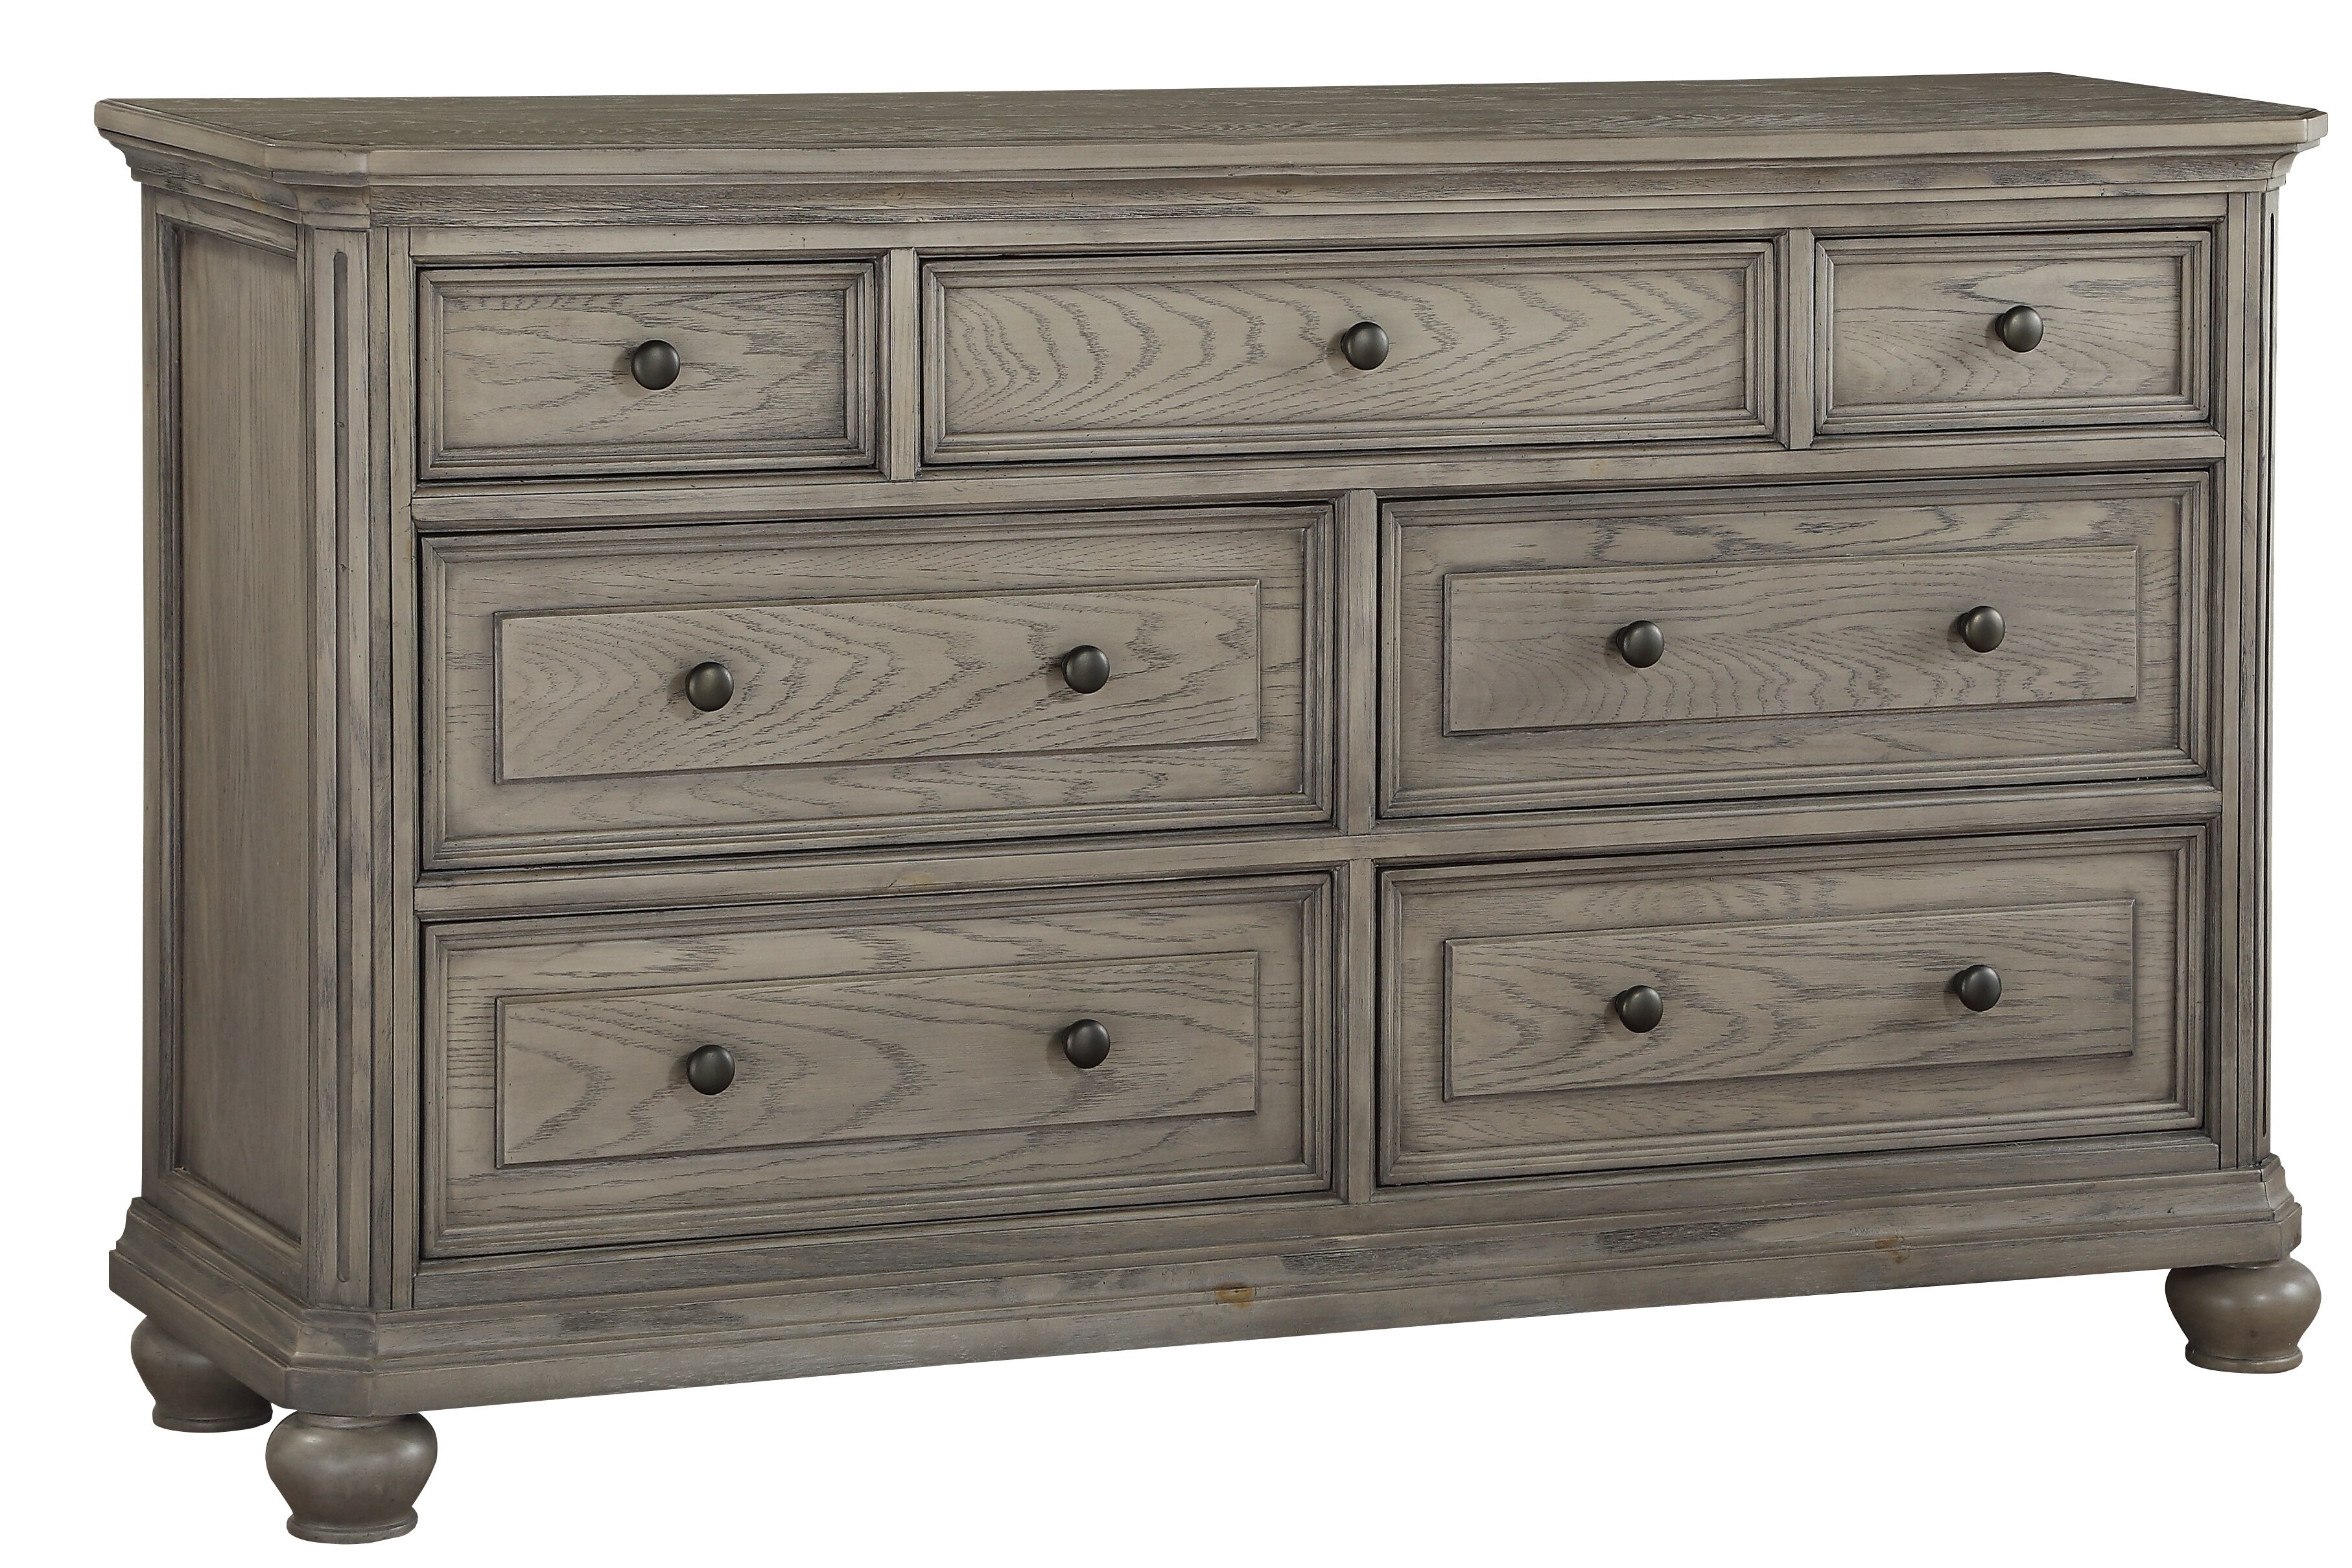 Ophelia Co Transitional Style 7 Drawer Wooden Dresser With Bun